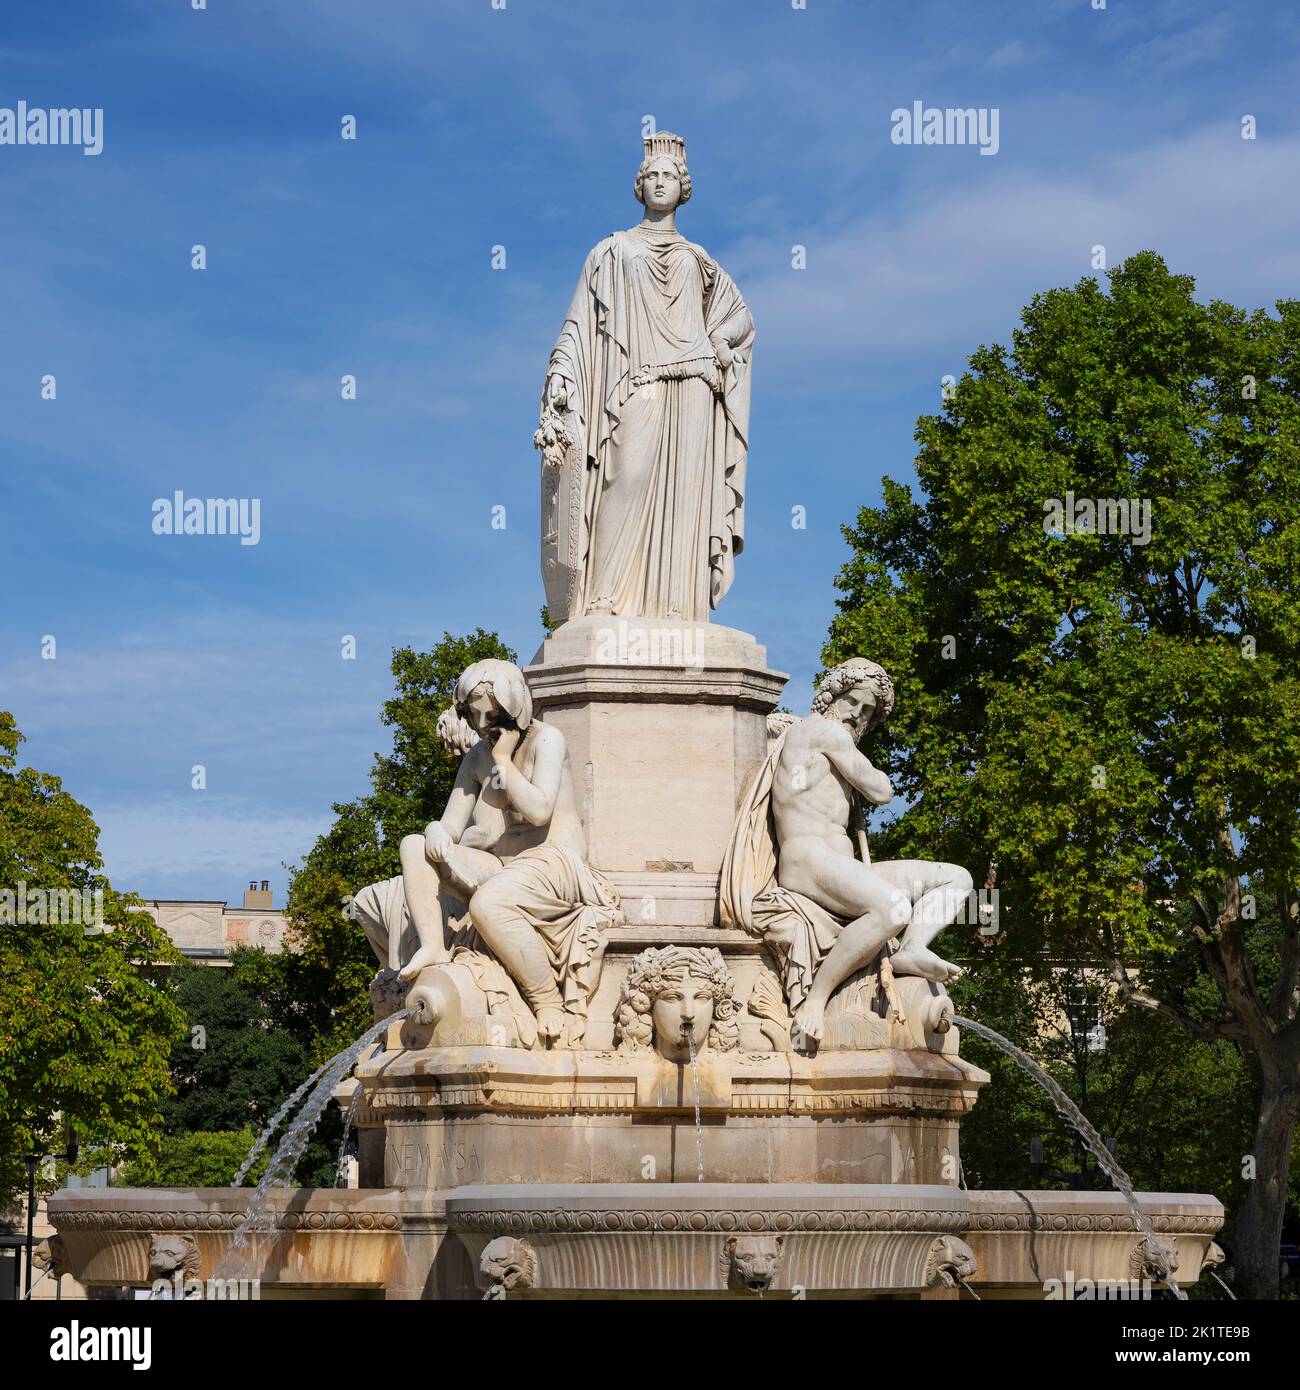 Famous fountain in Nimes, France, Europe Stock Photo